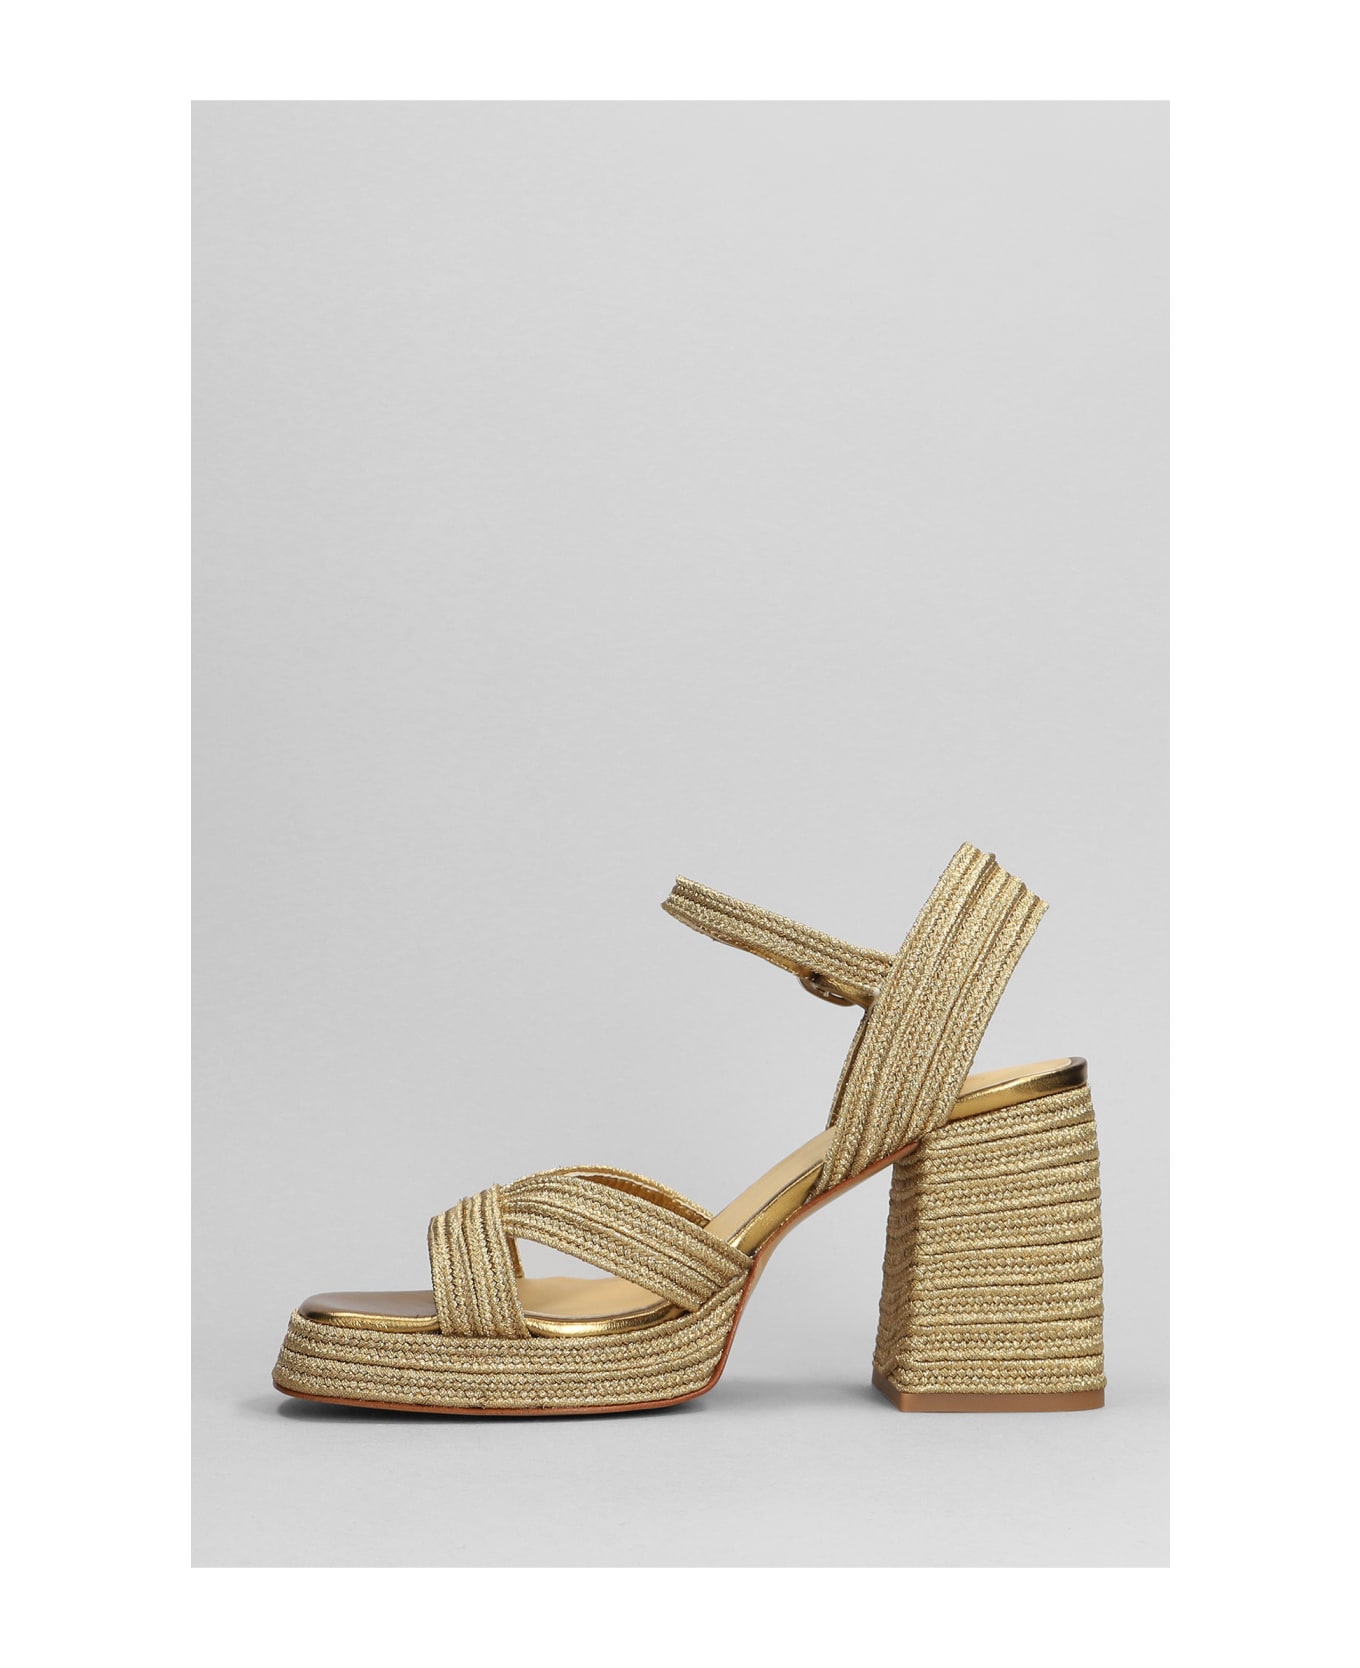 Castañer Valle-142 Sandals In Gold Leather - gold サンダル